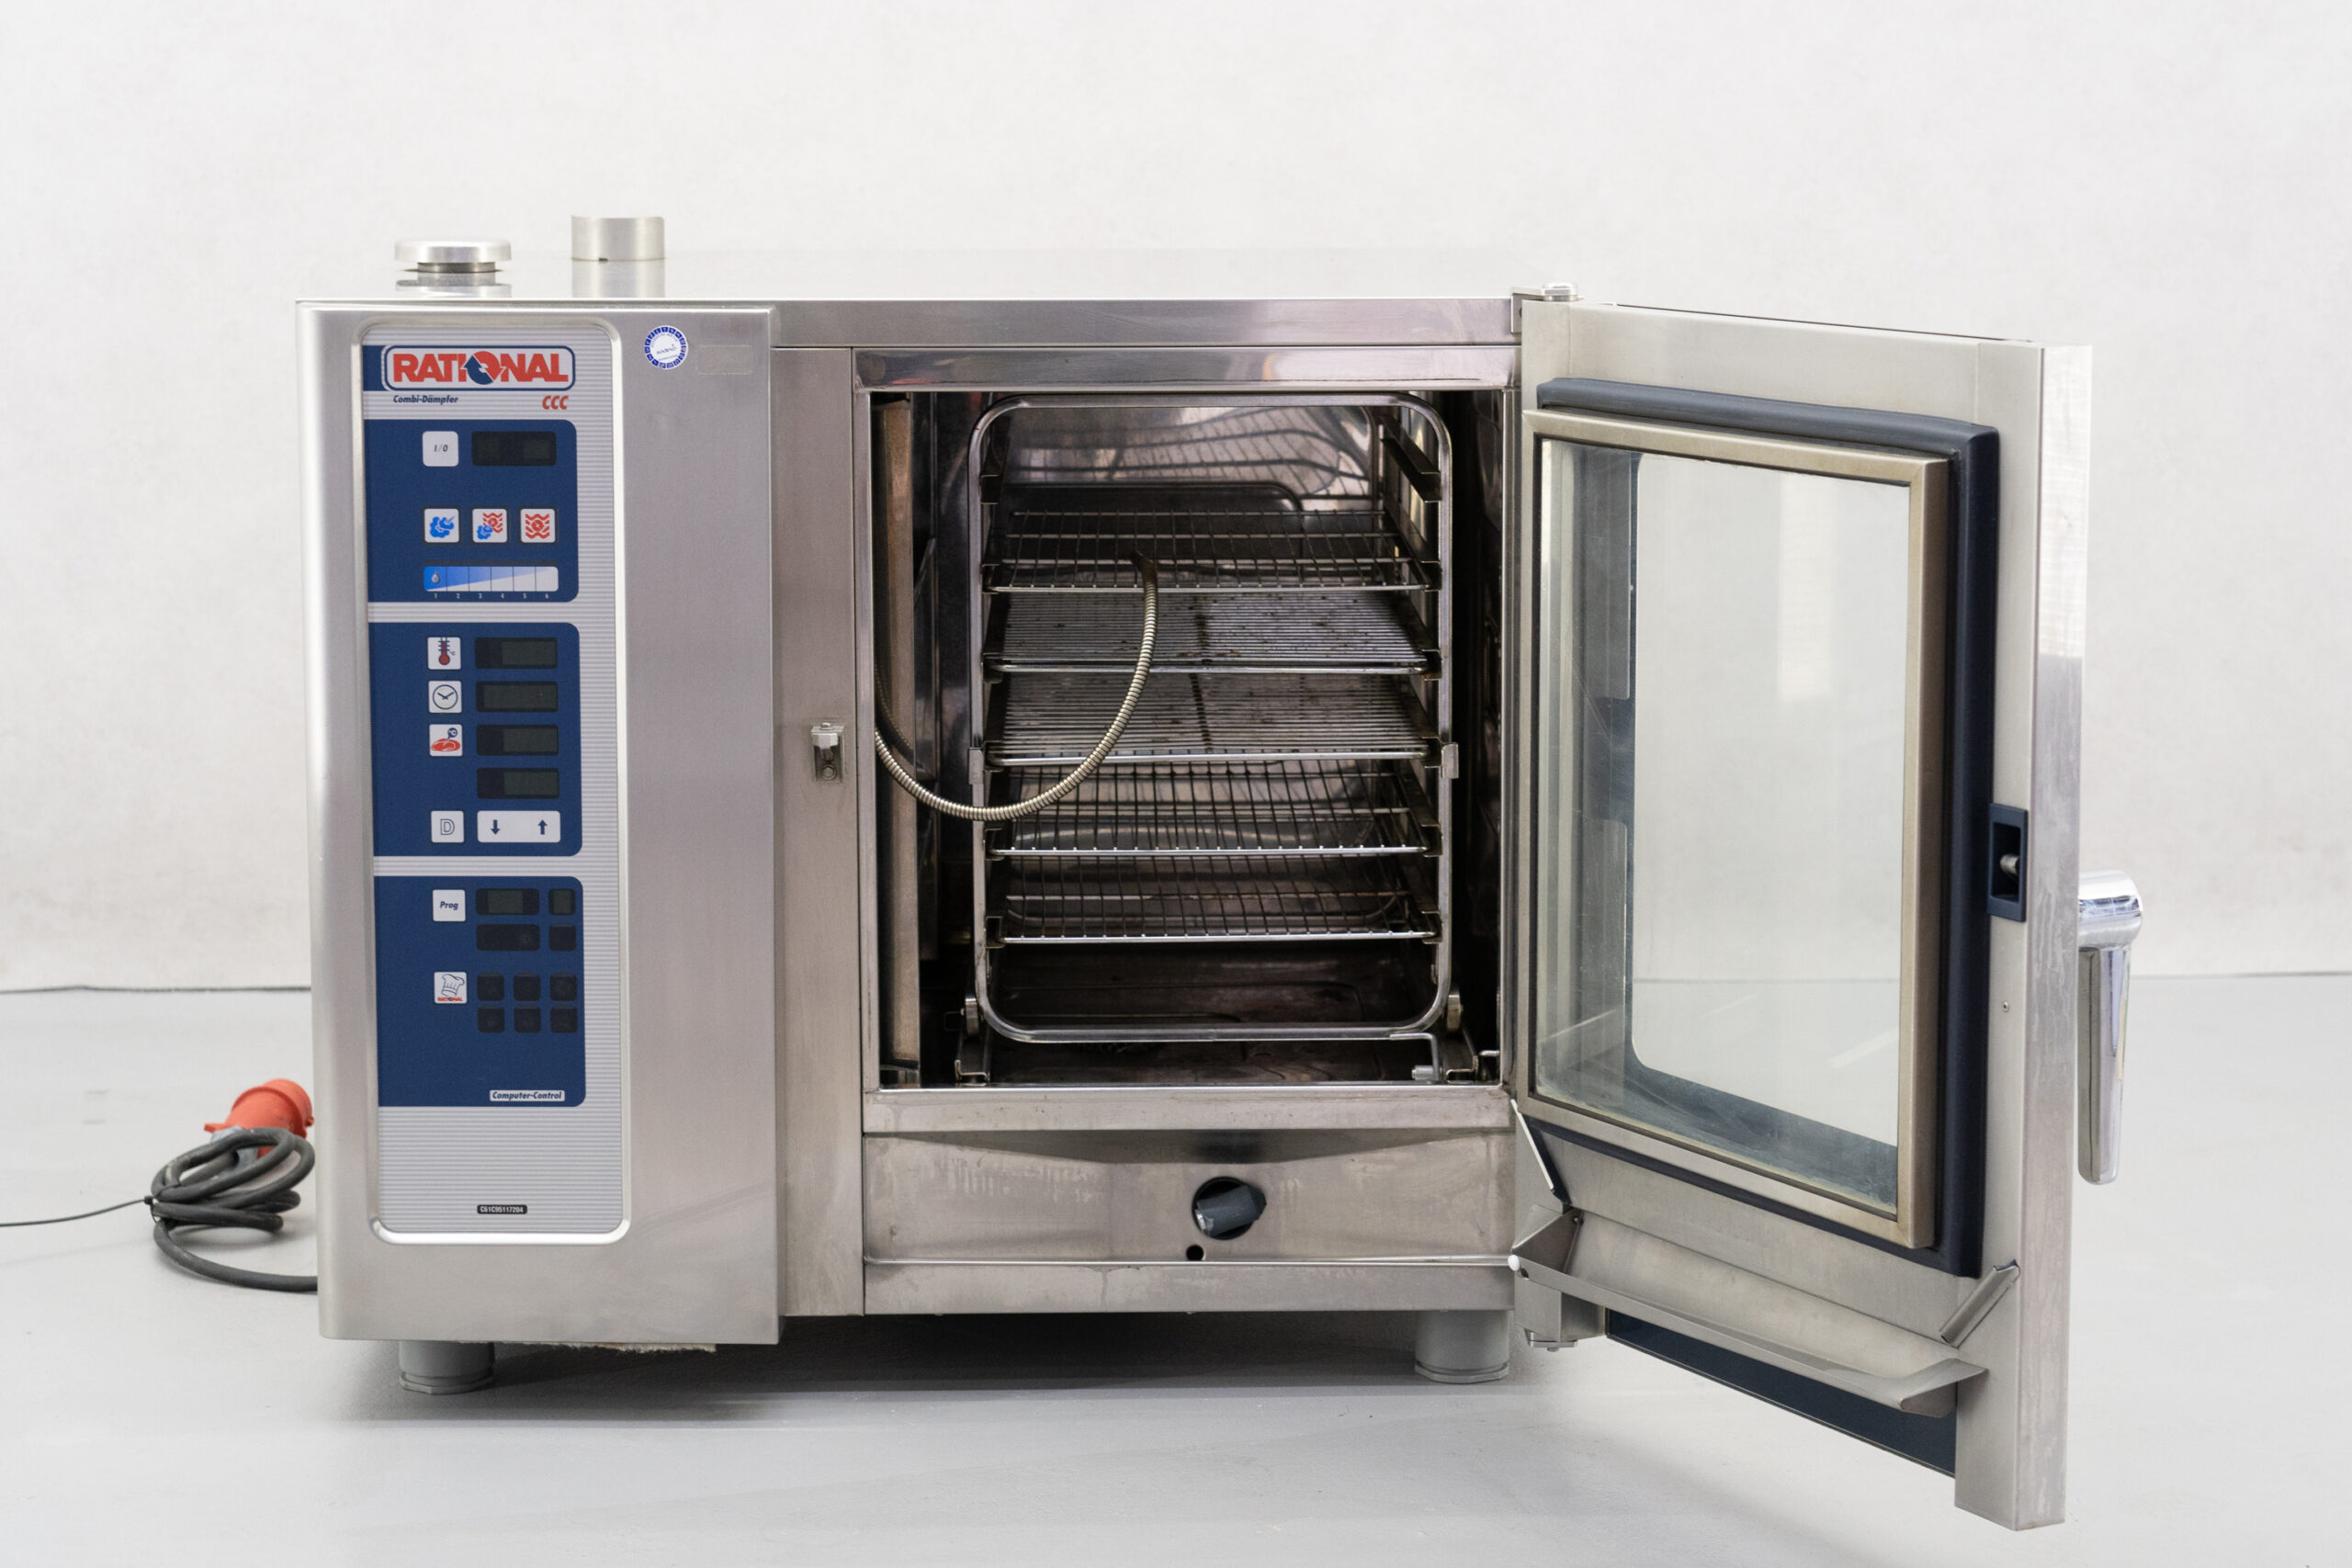 https://www.geminibv.com/wp-content/uploads/2023/06/6612-Rational-CCC-61-Combie-oven-05-scaled.jpg